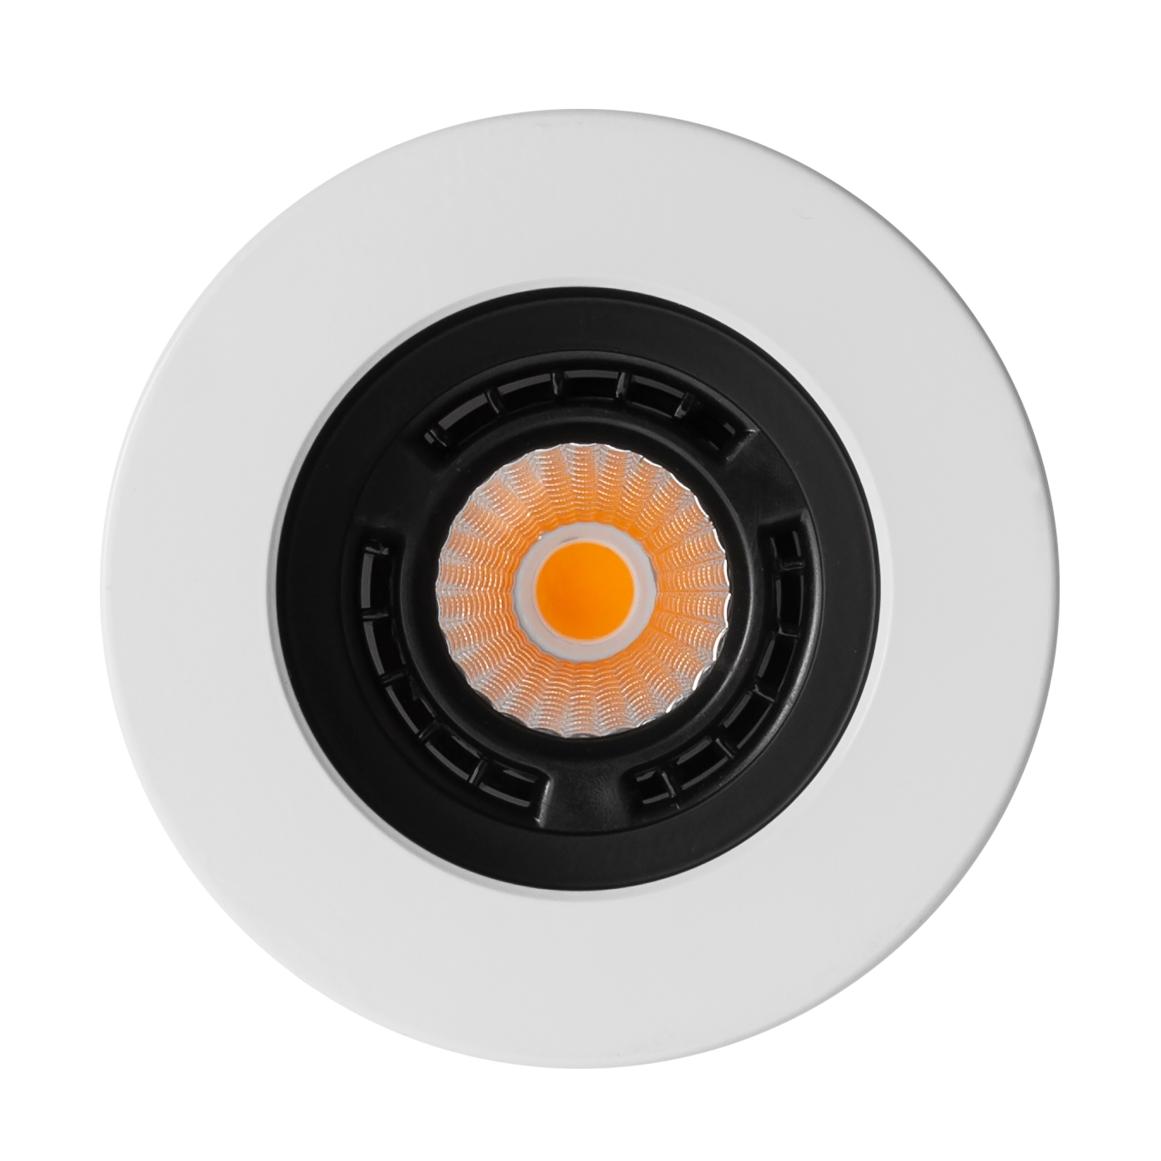 Picture Of Built-in ceiling power light